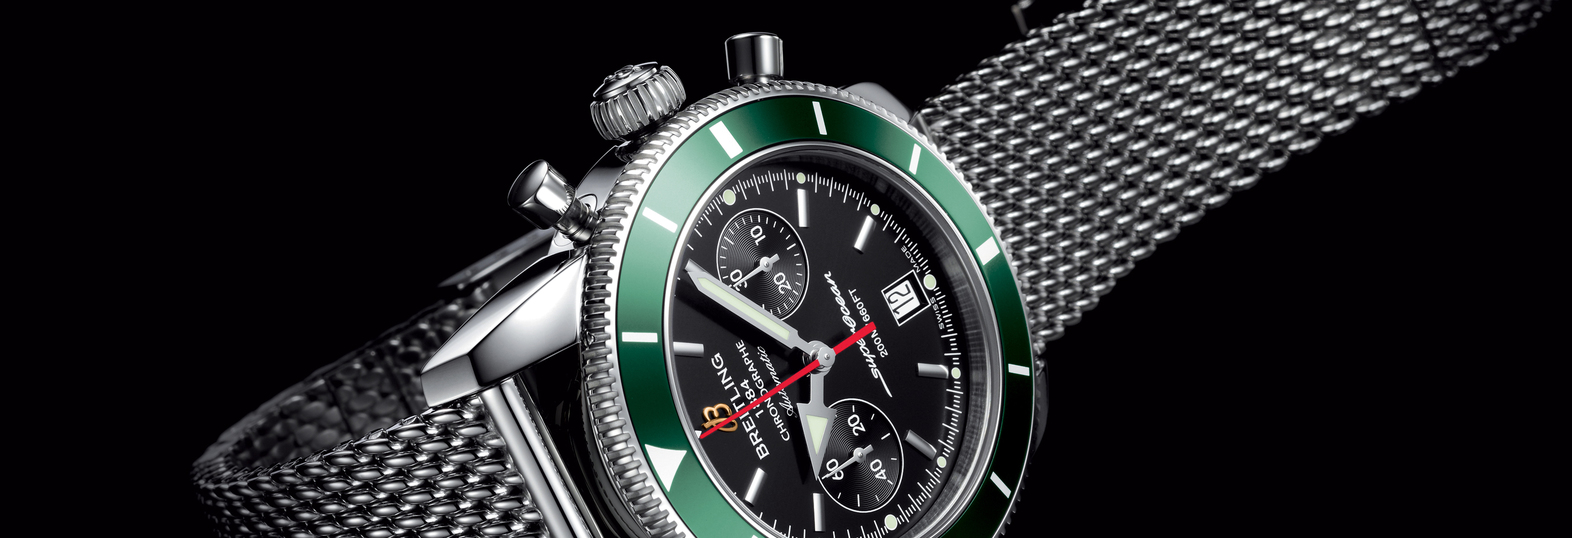 Breitling Top Time Limited Edition 